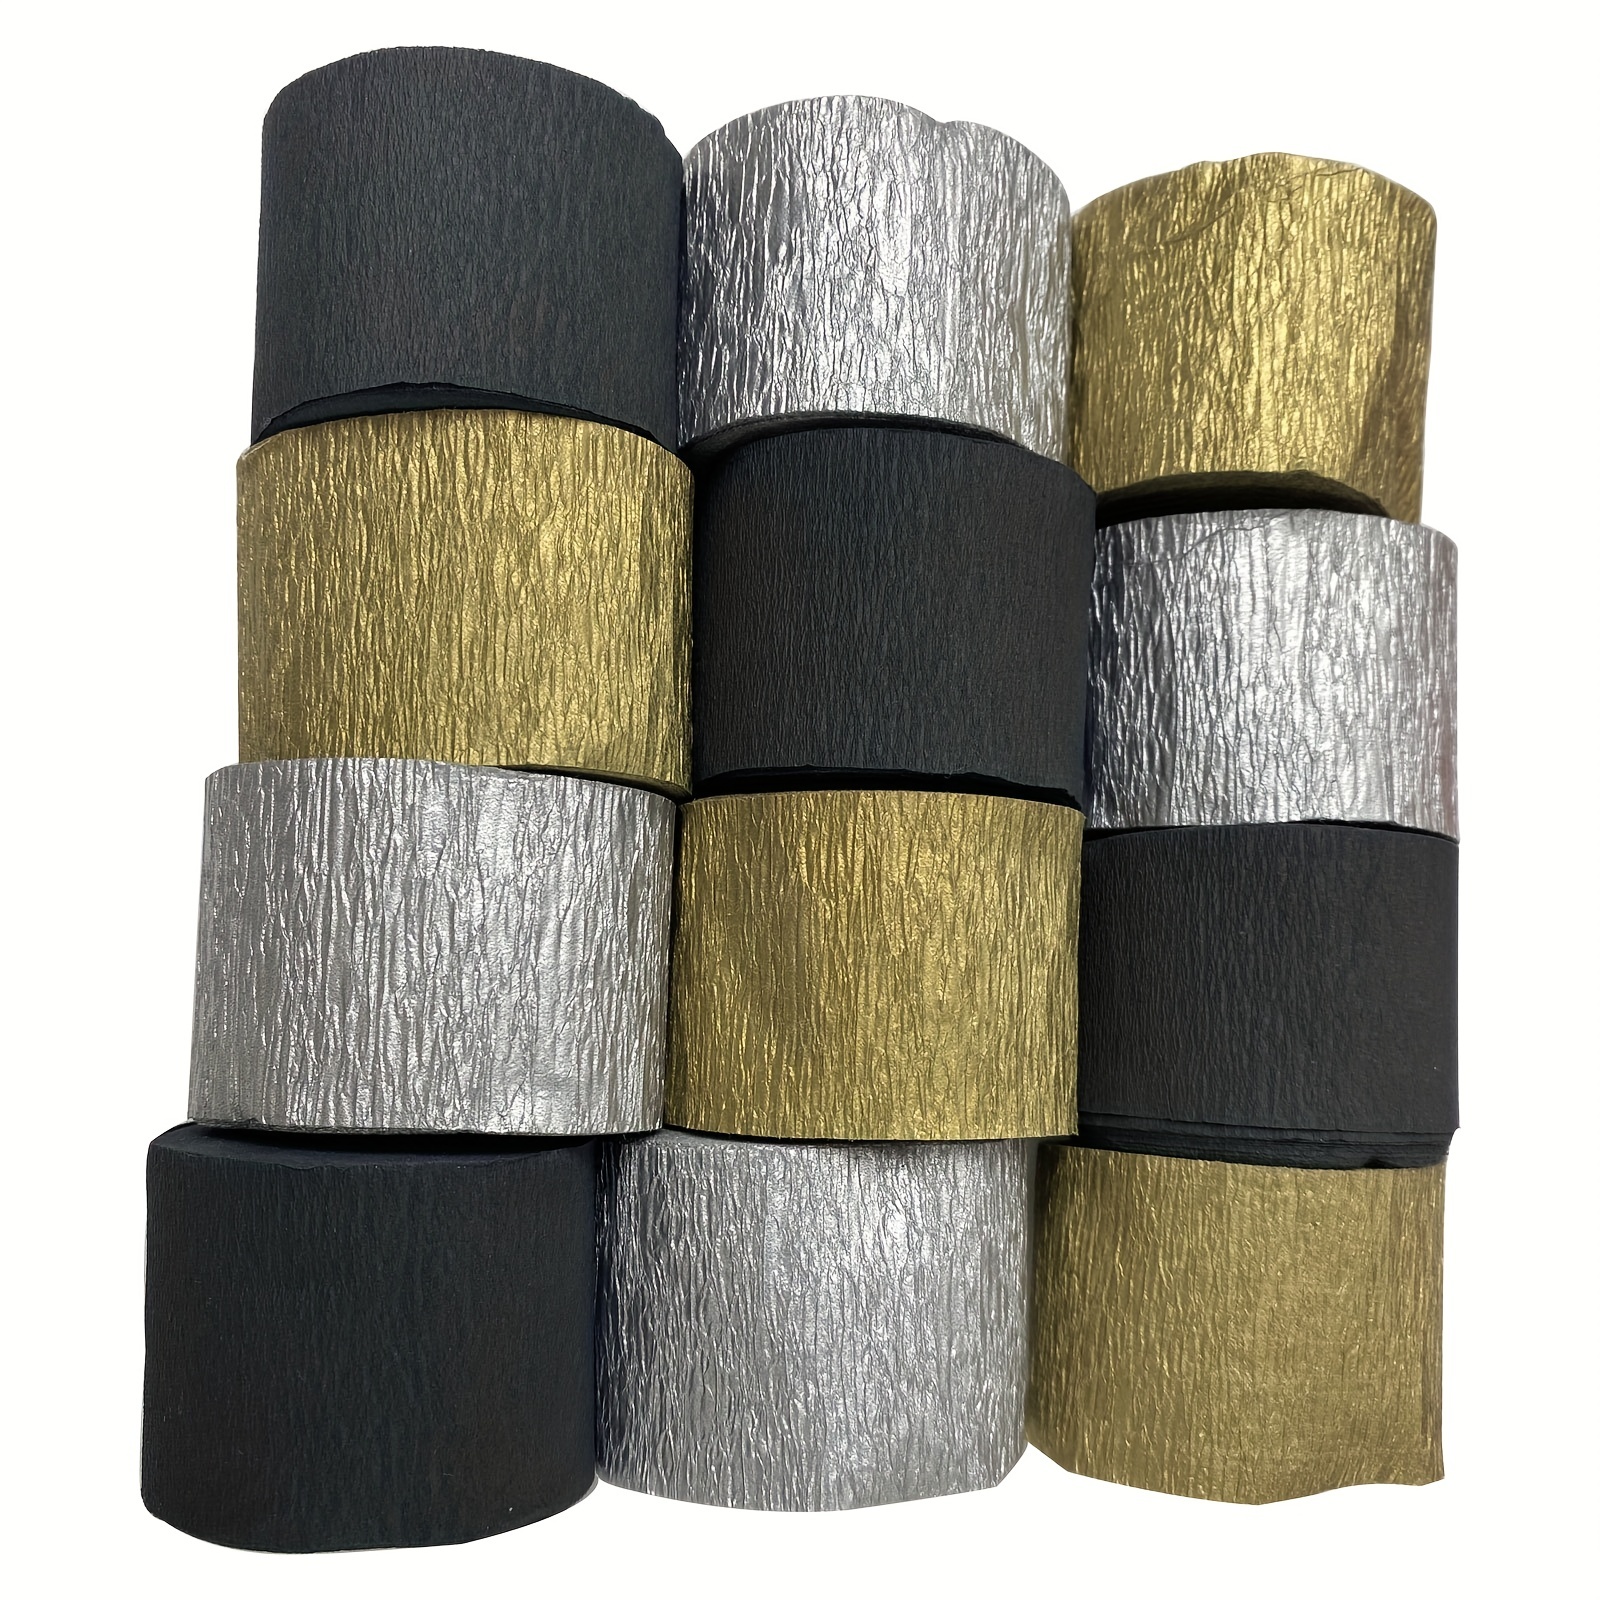 Sparkling Silver And Black Crepe Paper Streamers For Party